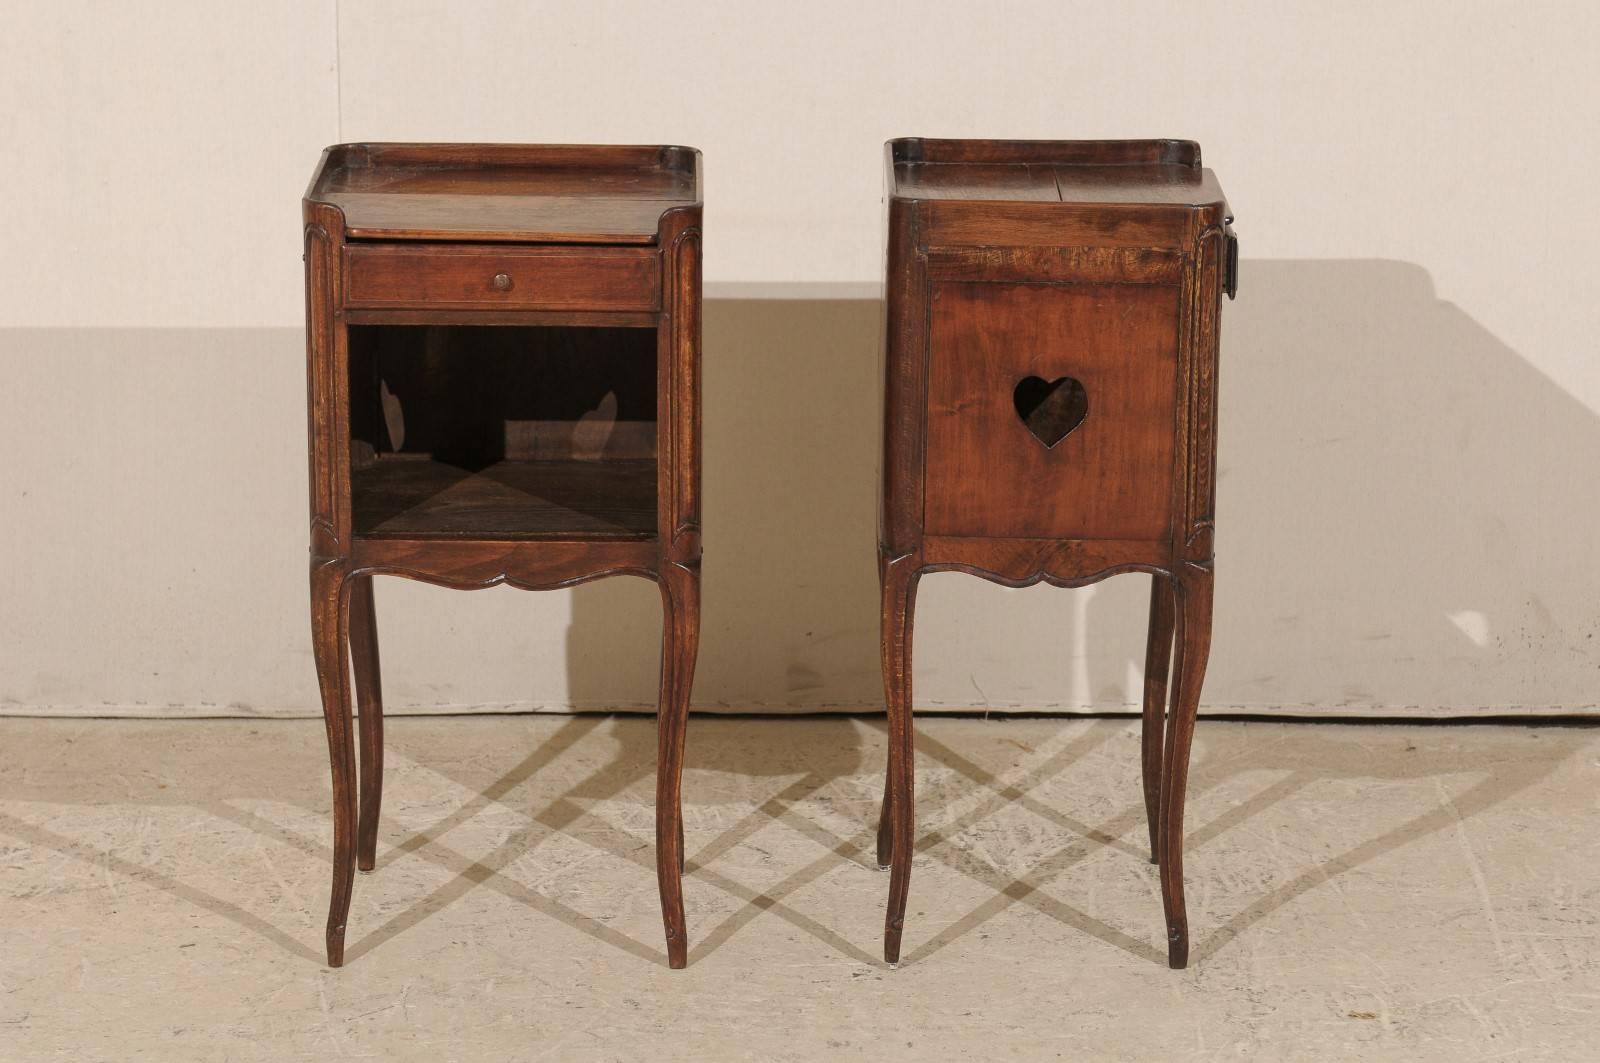 19th Century Pair of French Stained Wood Side Tables or Nightstands in Warm Cabernet Mahogany